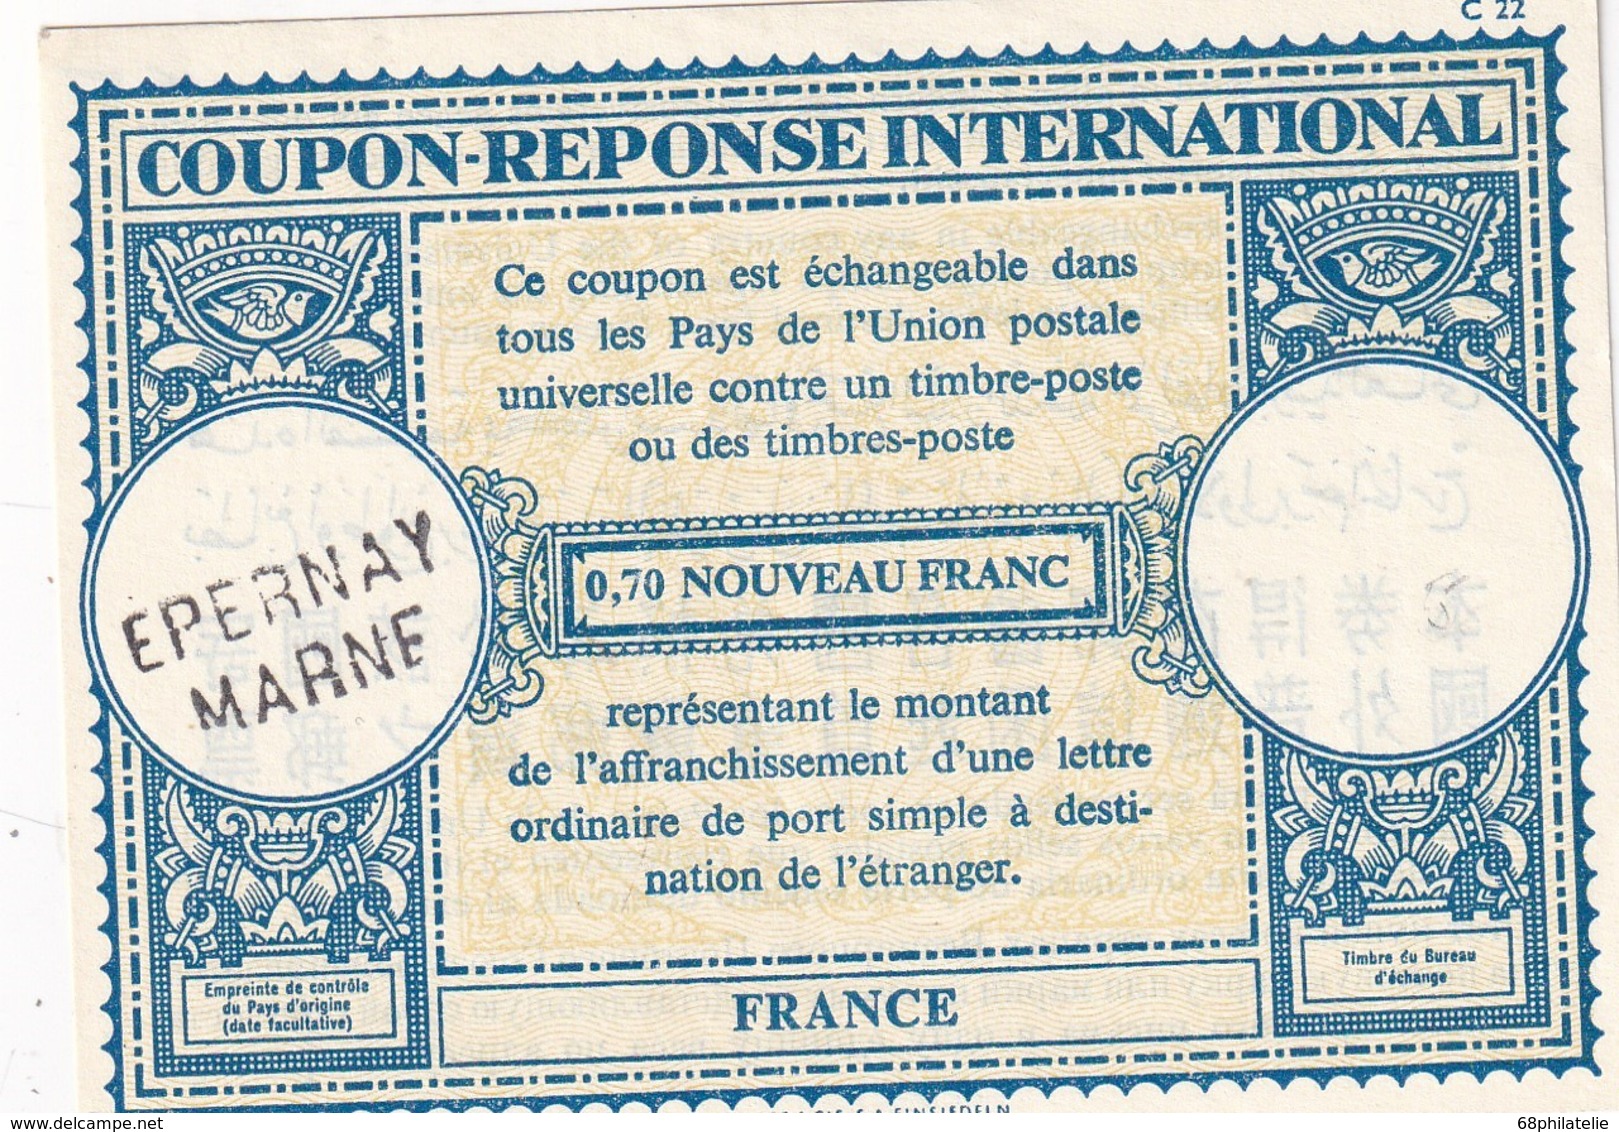 FRANCE     ENTIER POSTAL  /GANZSACHE/POSTAL STATIONERY   COUPON REPONSE INTERNATIONAL DE EPERNAY - Antwoordbons